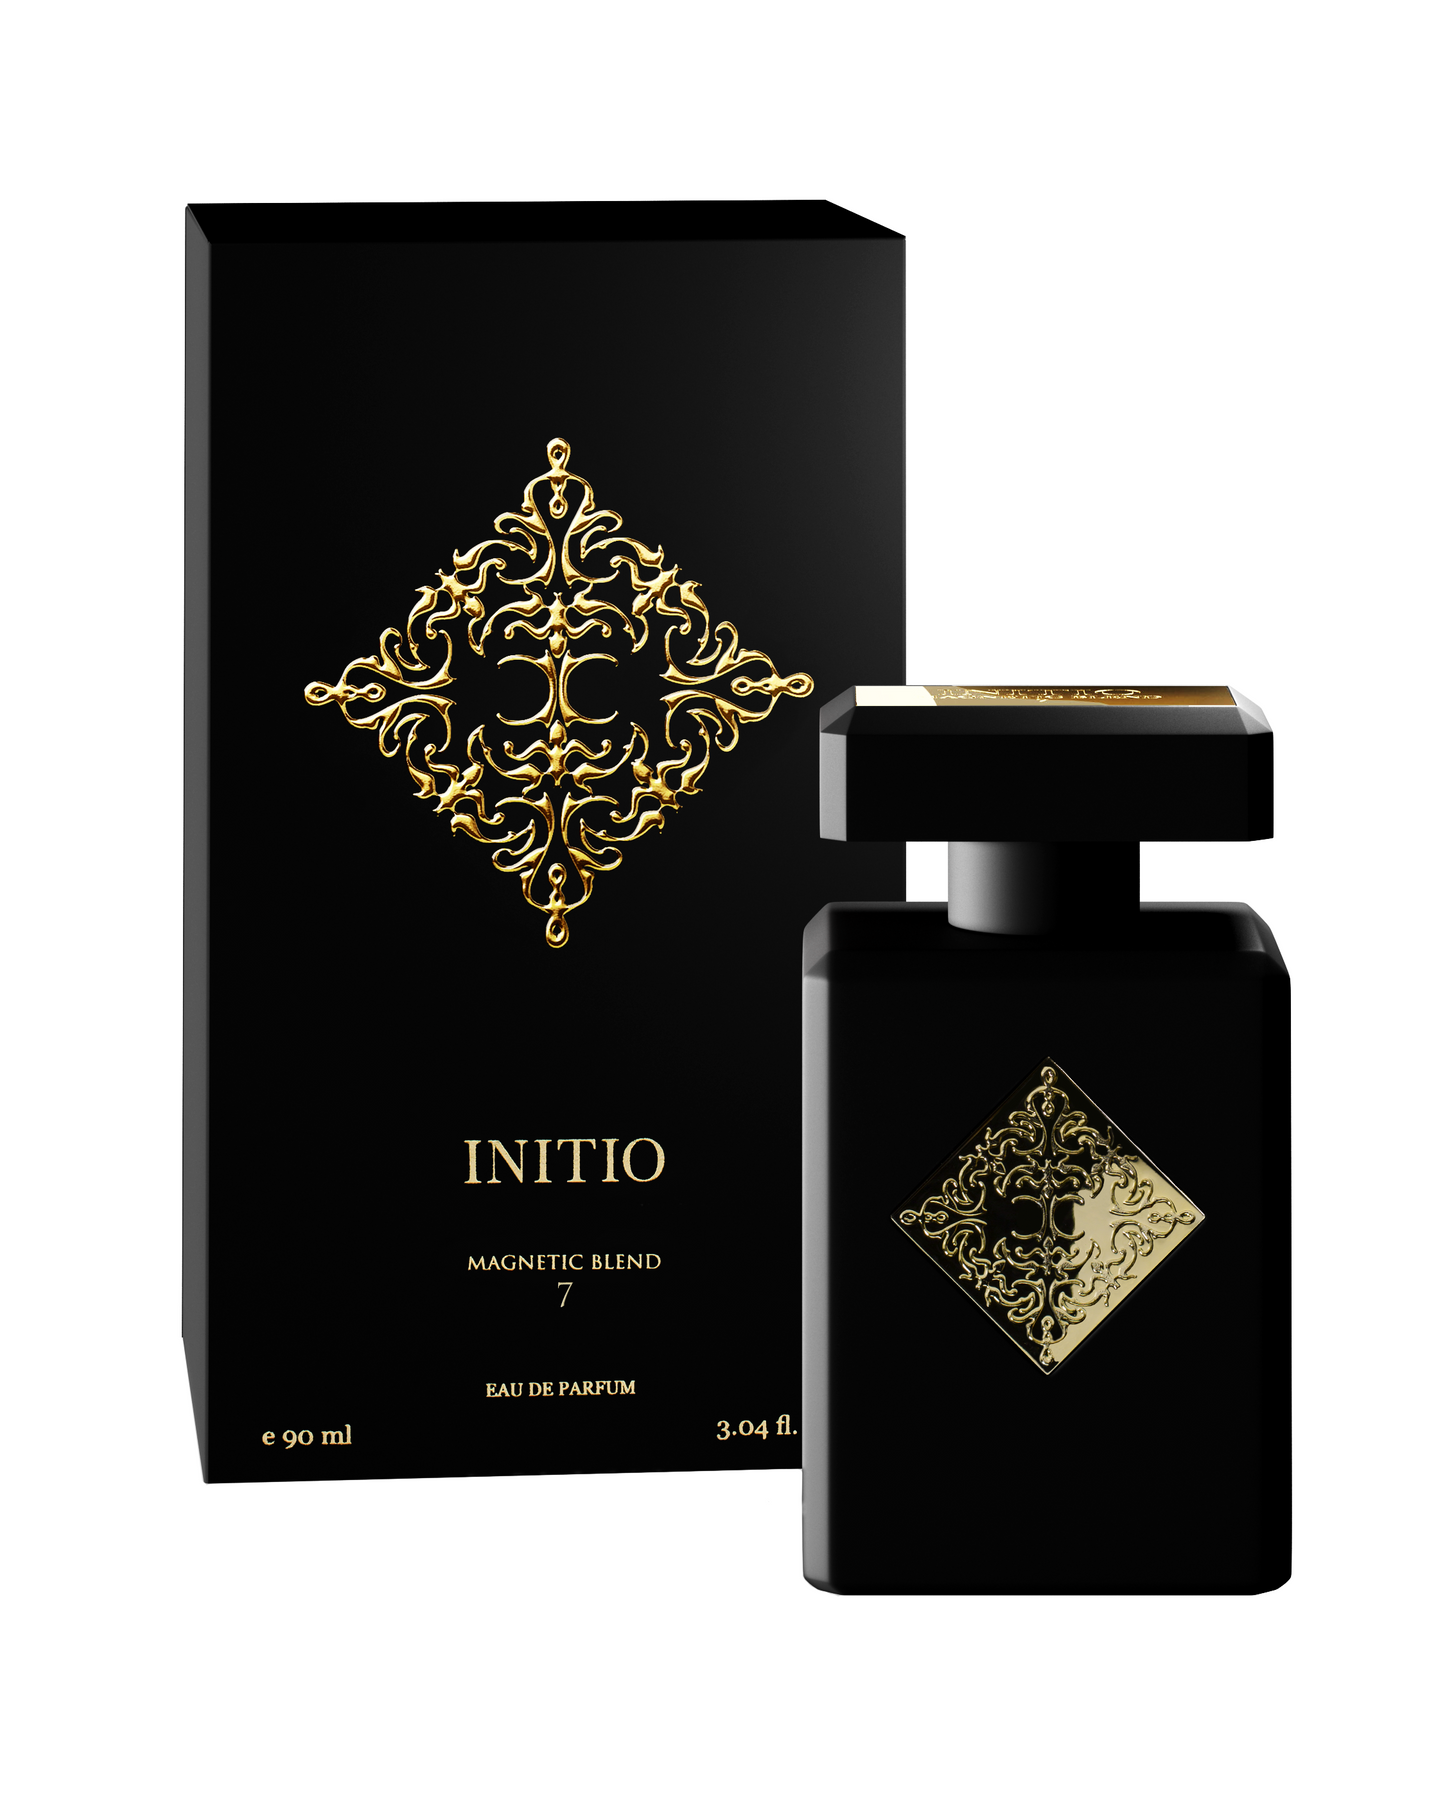 Initio - Magnetic Blend 7.